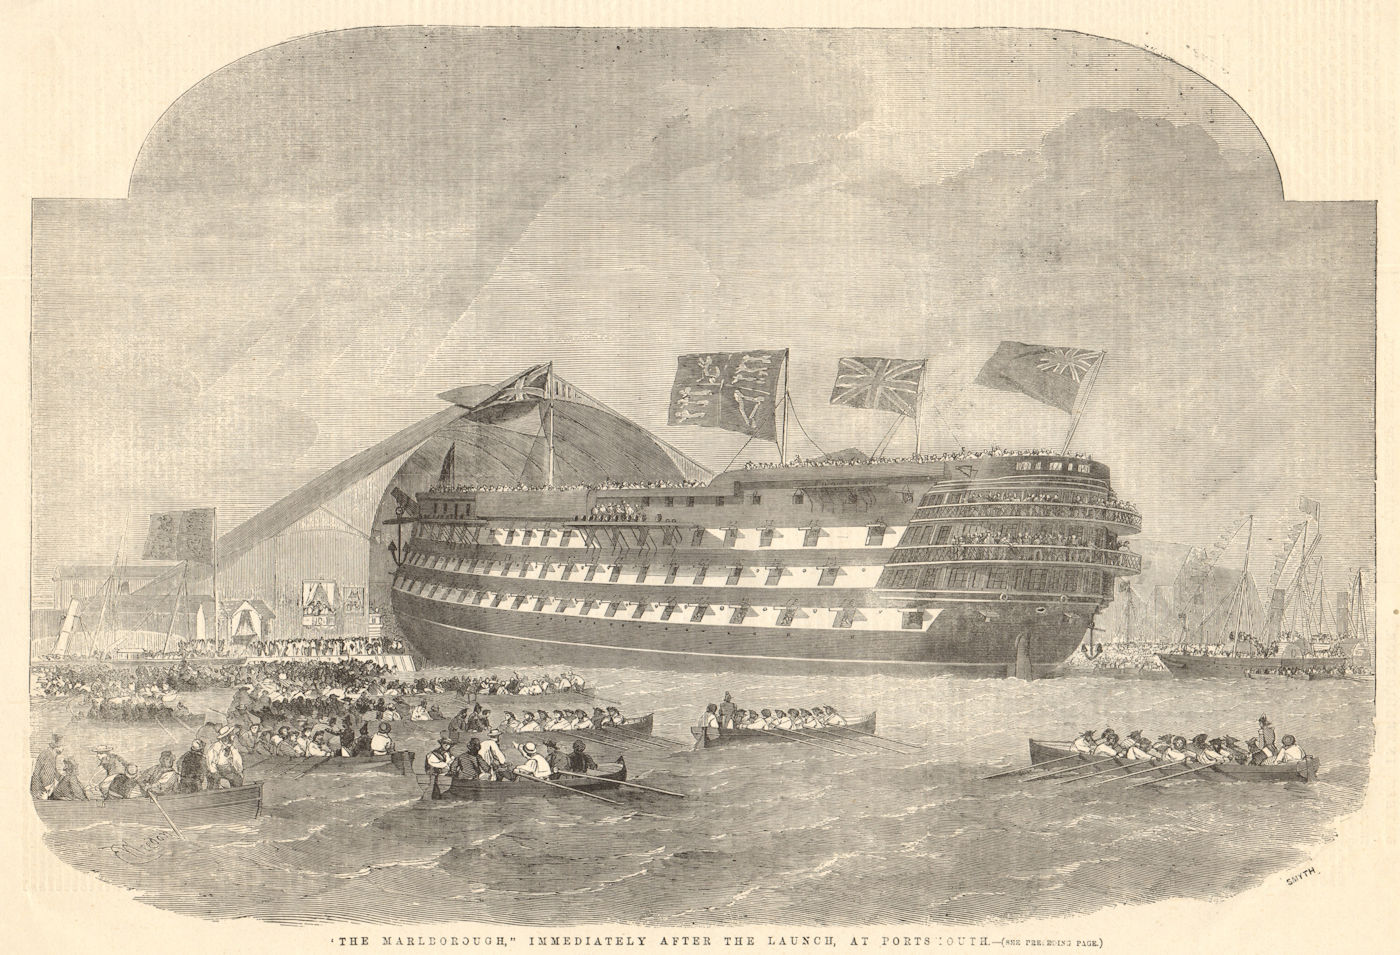 Associate Product The Marlborough, immediately after the launch, at Portsmouth. Ships 1855